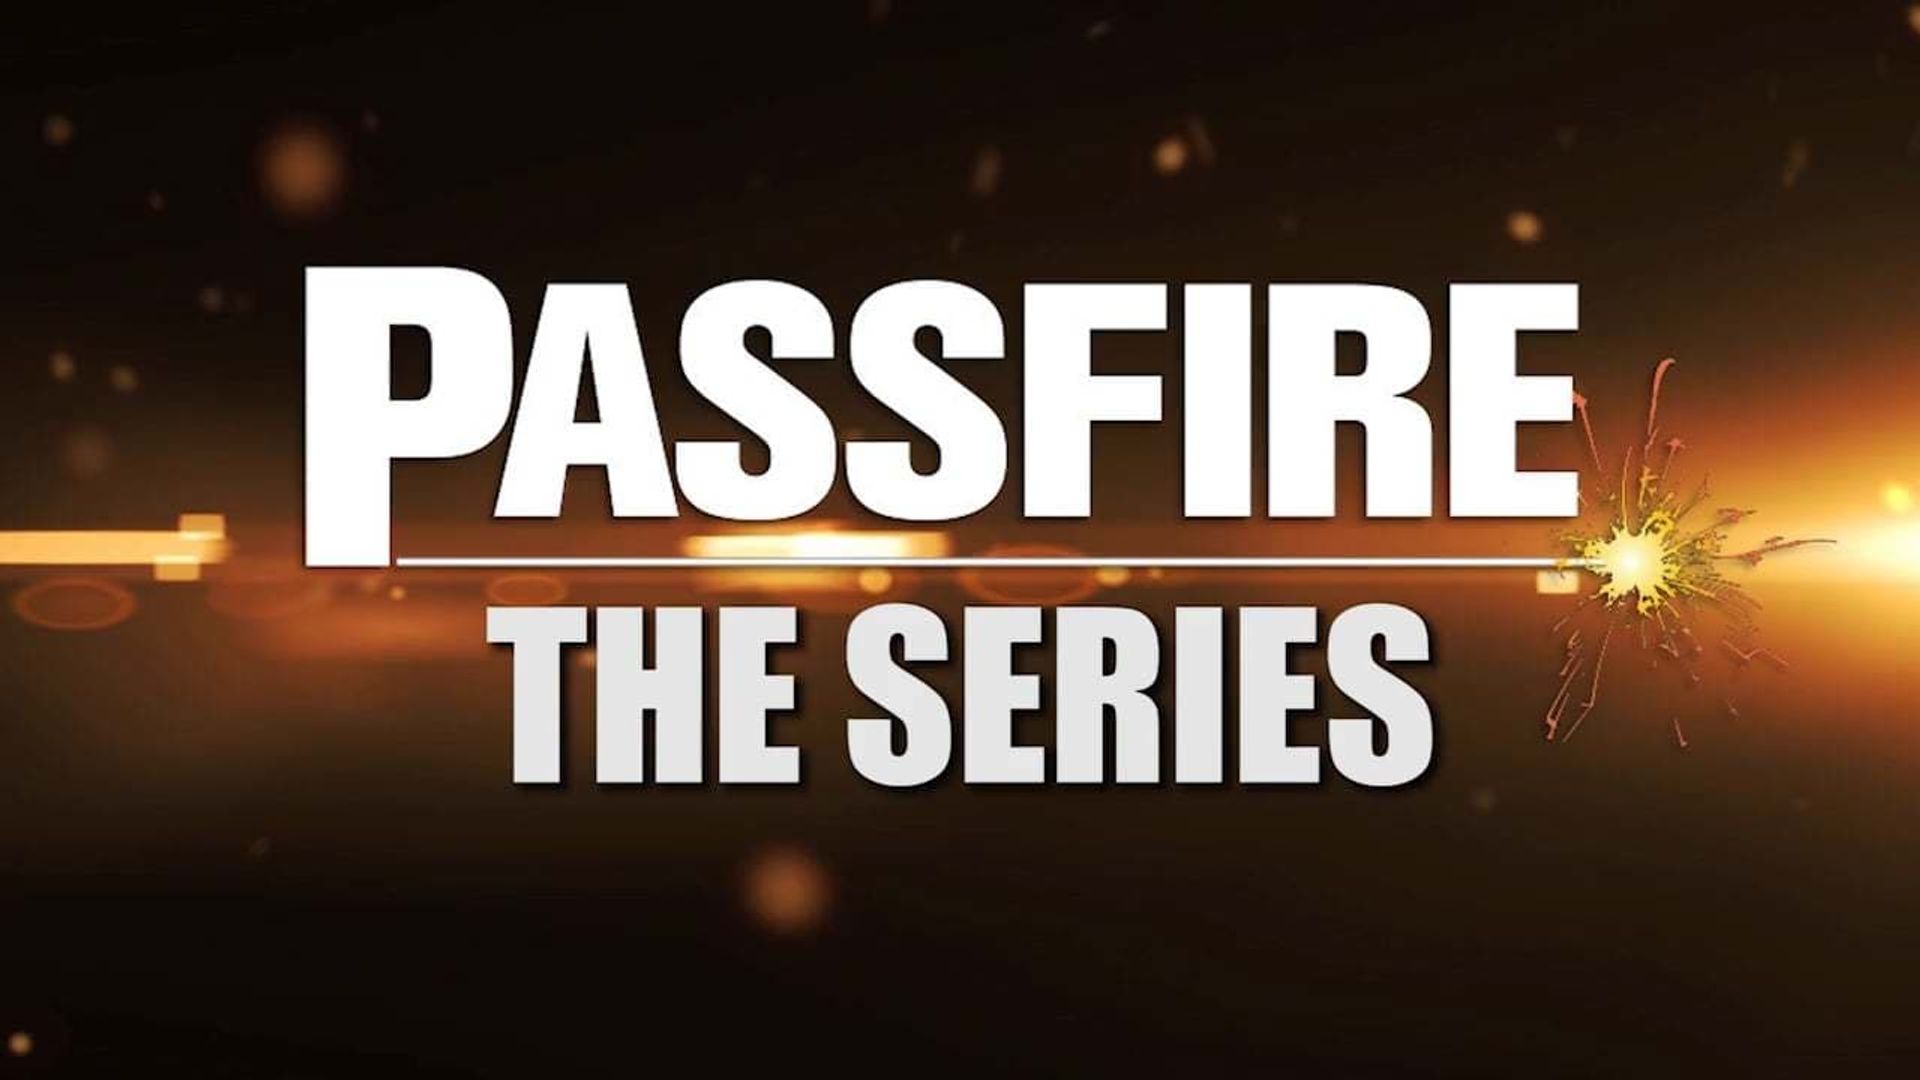 Passfire: The Series background